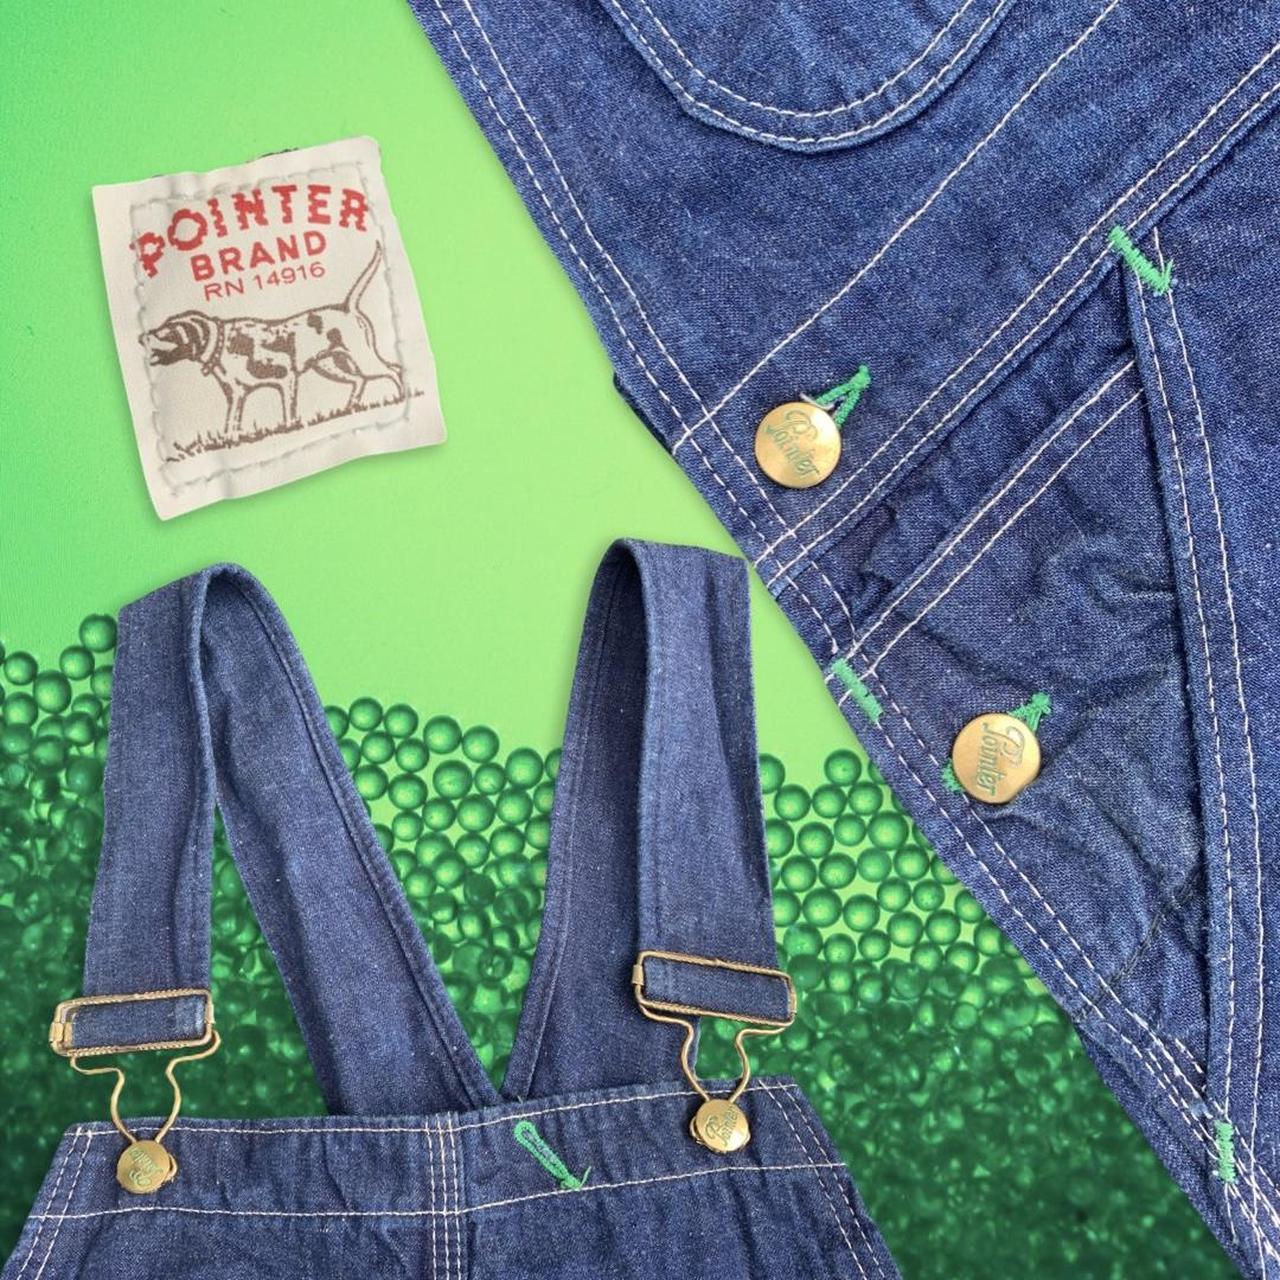 1990s POINTER BRAND DENIM OVERALL PANTS 💚 THESE ARE - Depop